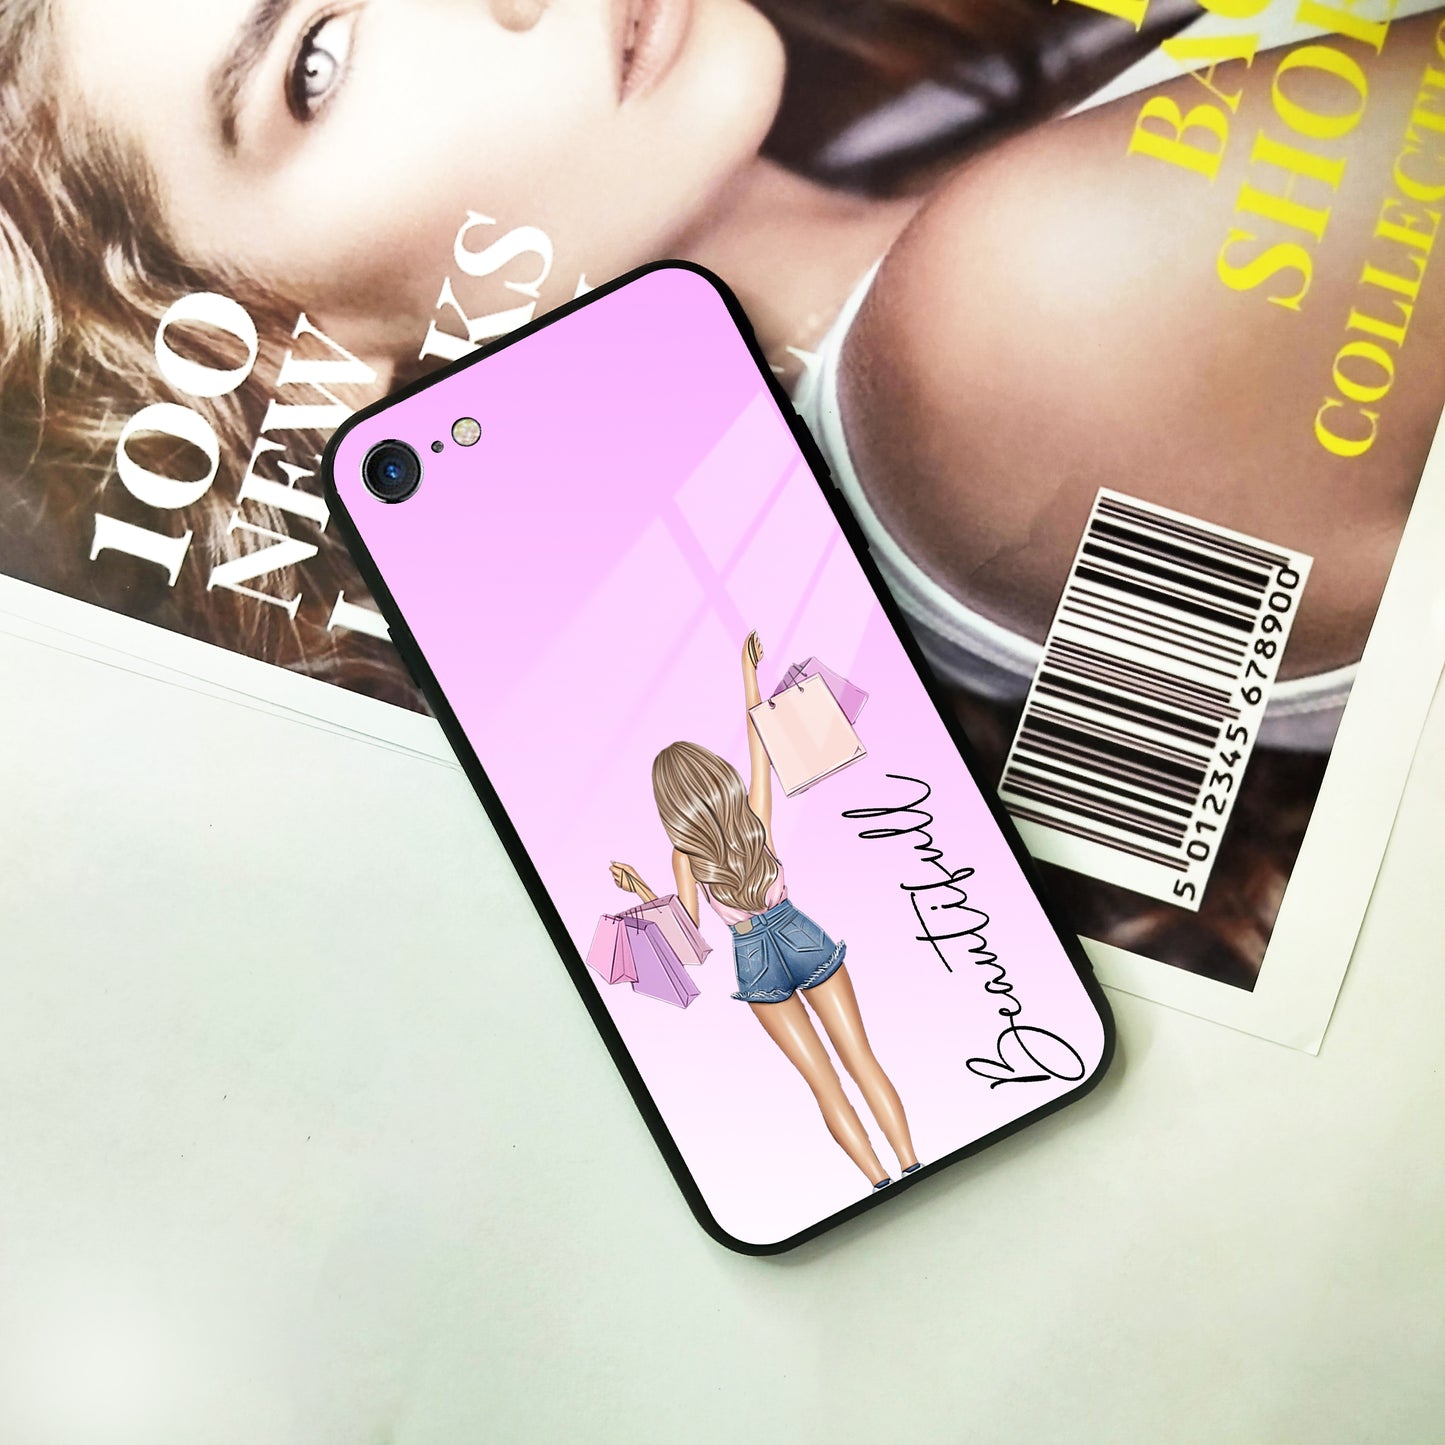 Girl With Bag Glass Case Cover For iPhone